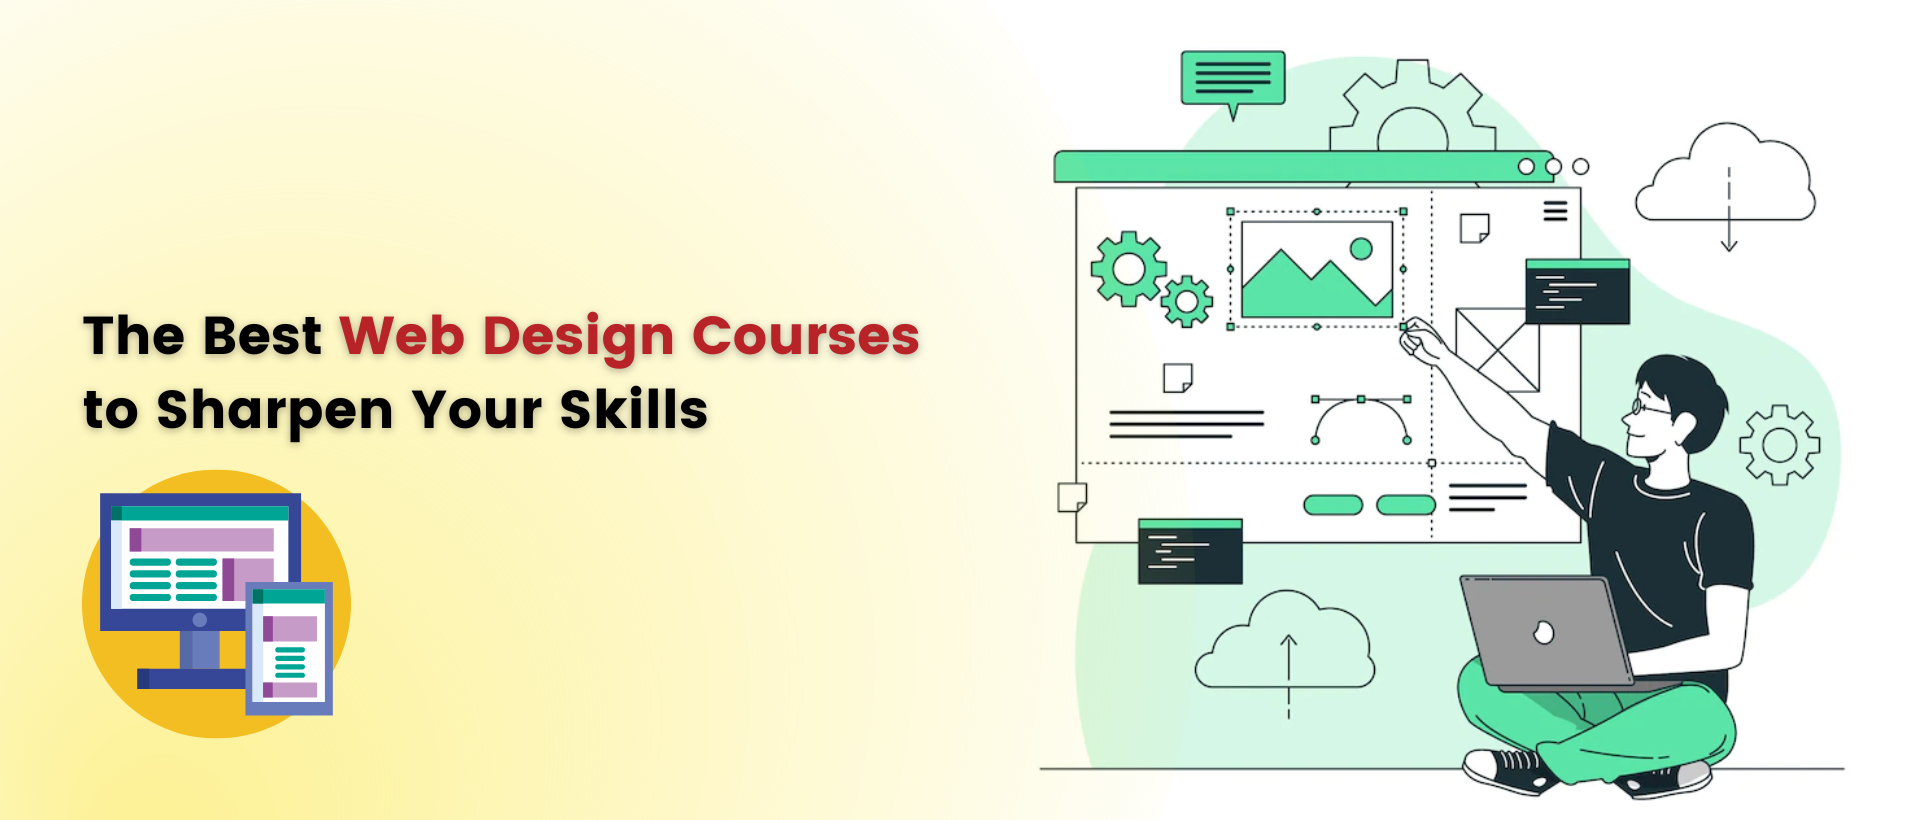 The Best Web Design Courses to Sharpen Your Skills